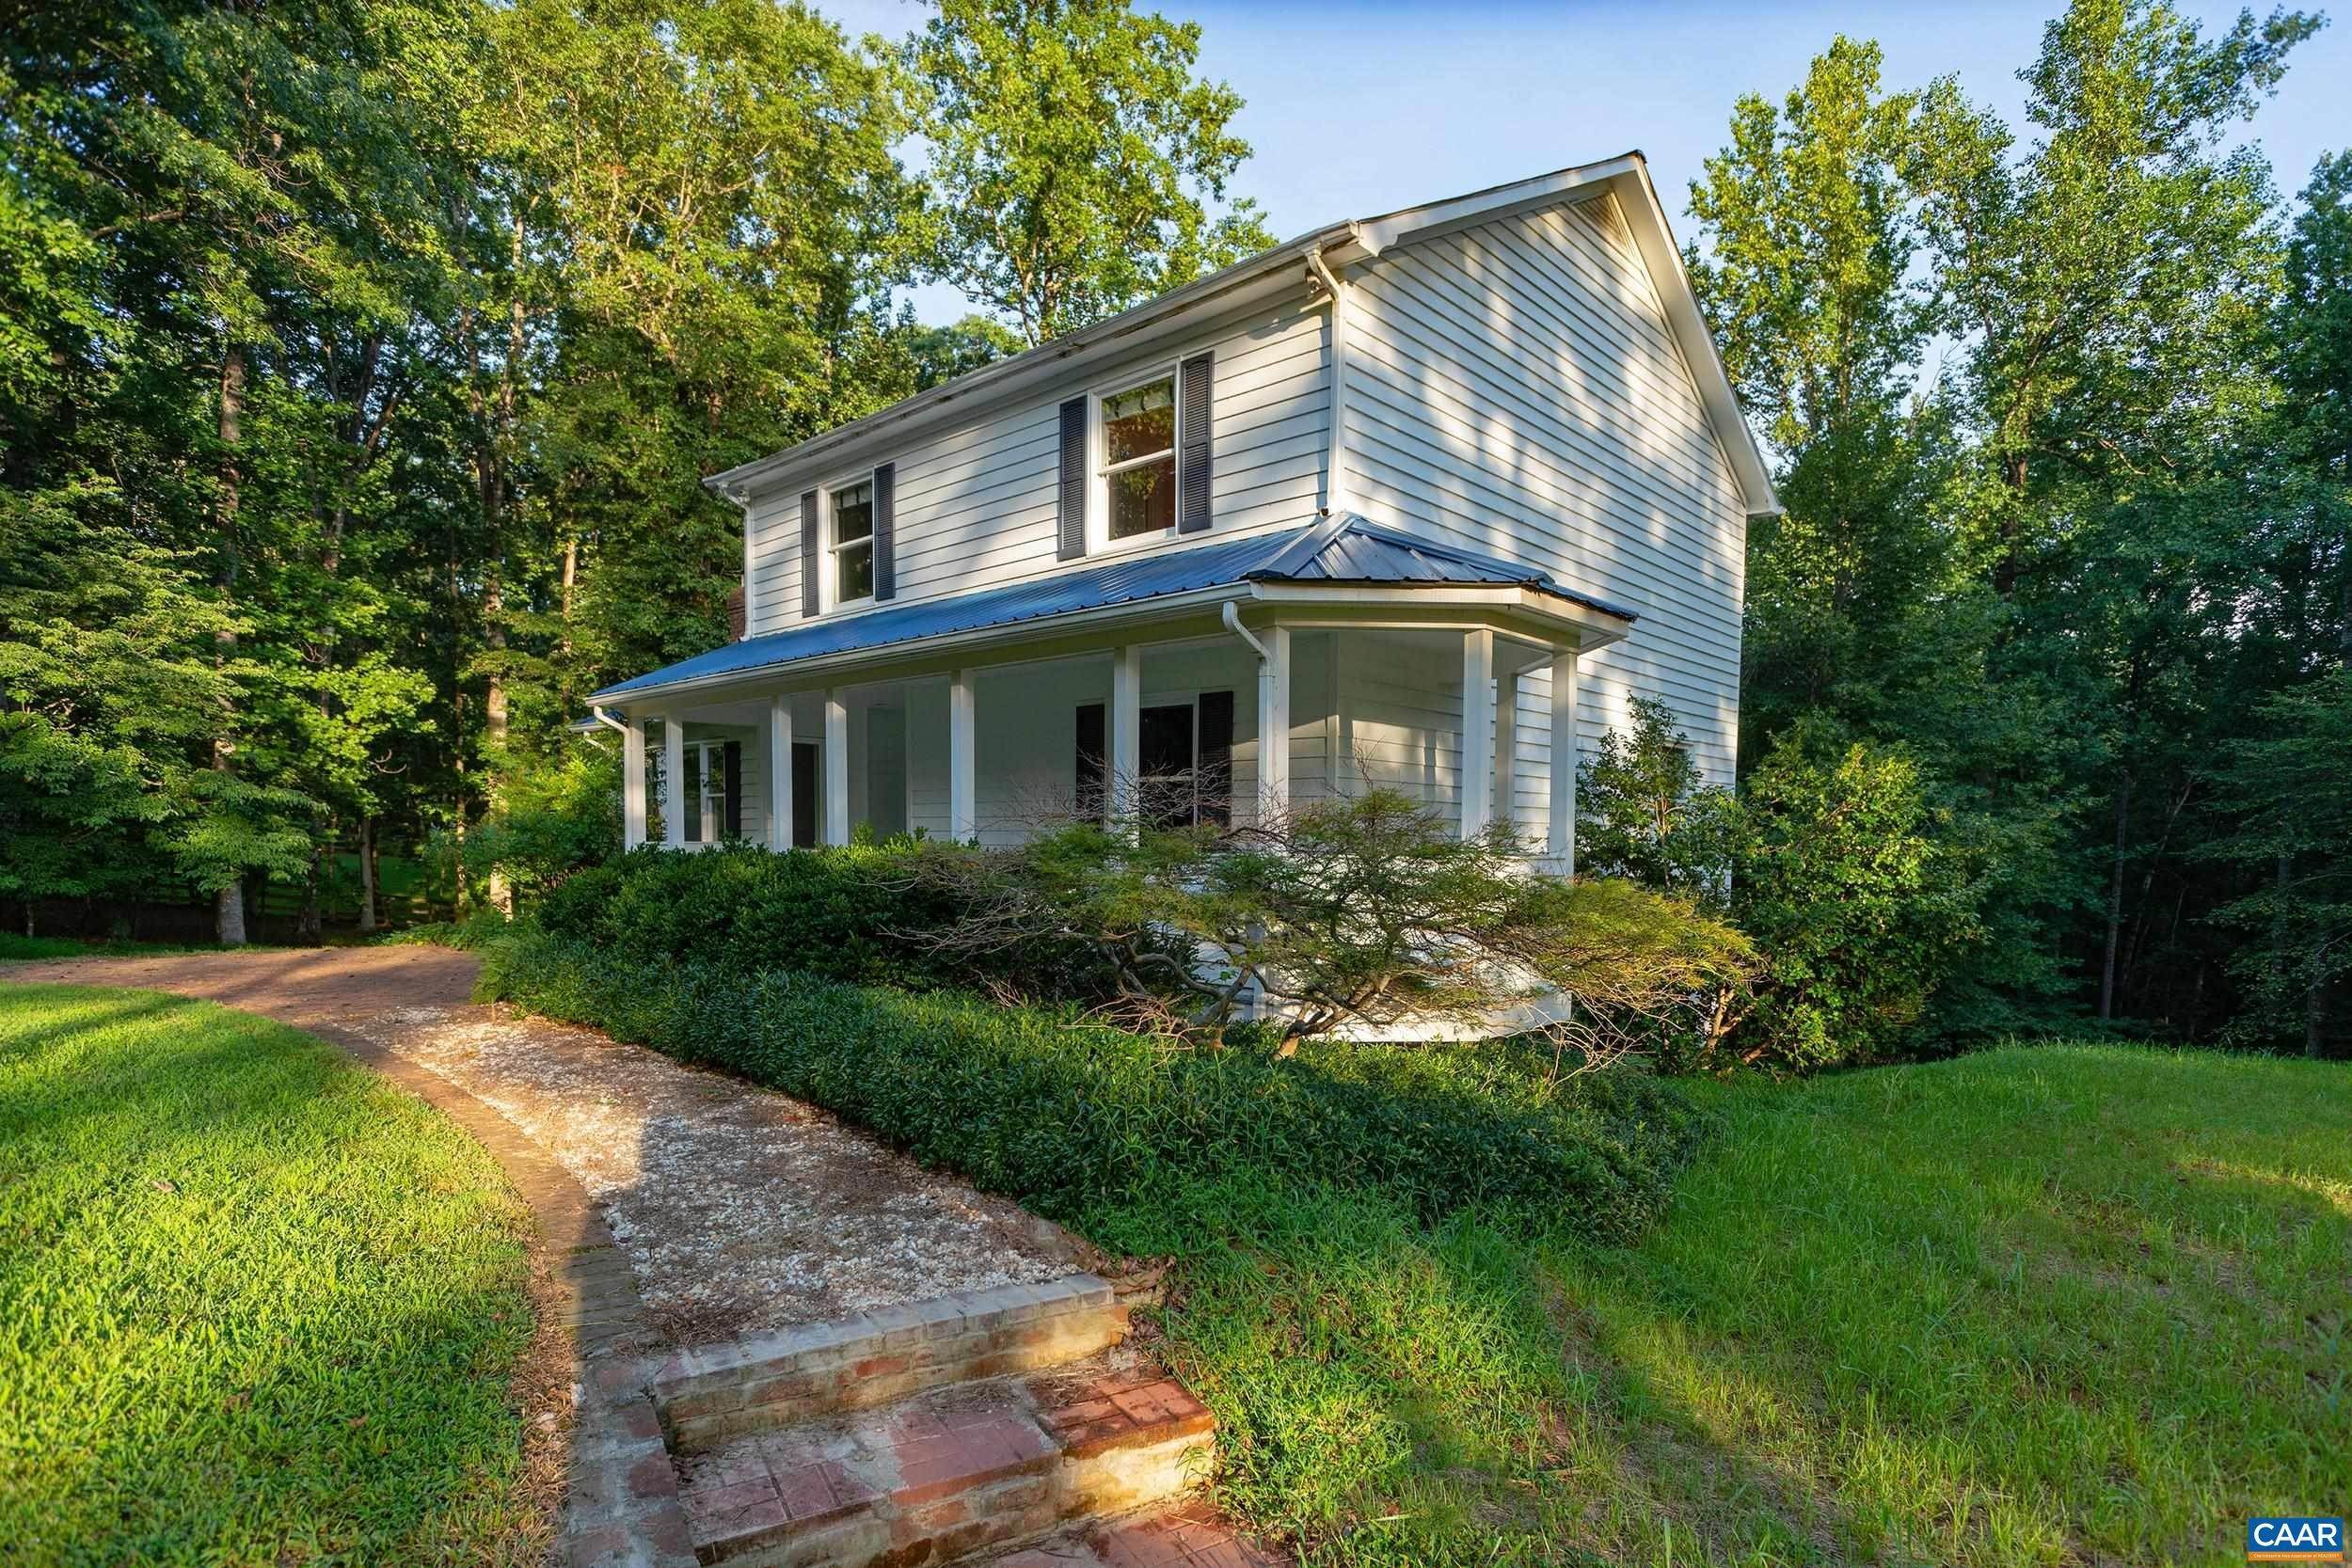 50. Single Family Homes for Sale at 2601 CARDINAL RIDGE Road Charlottesville, Virginia 22901 United States